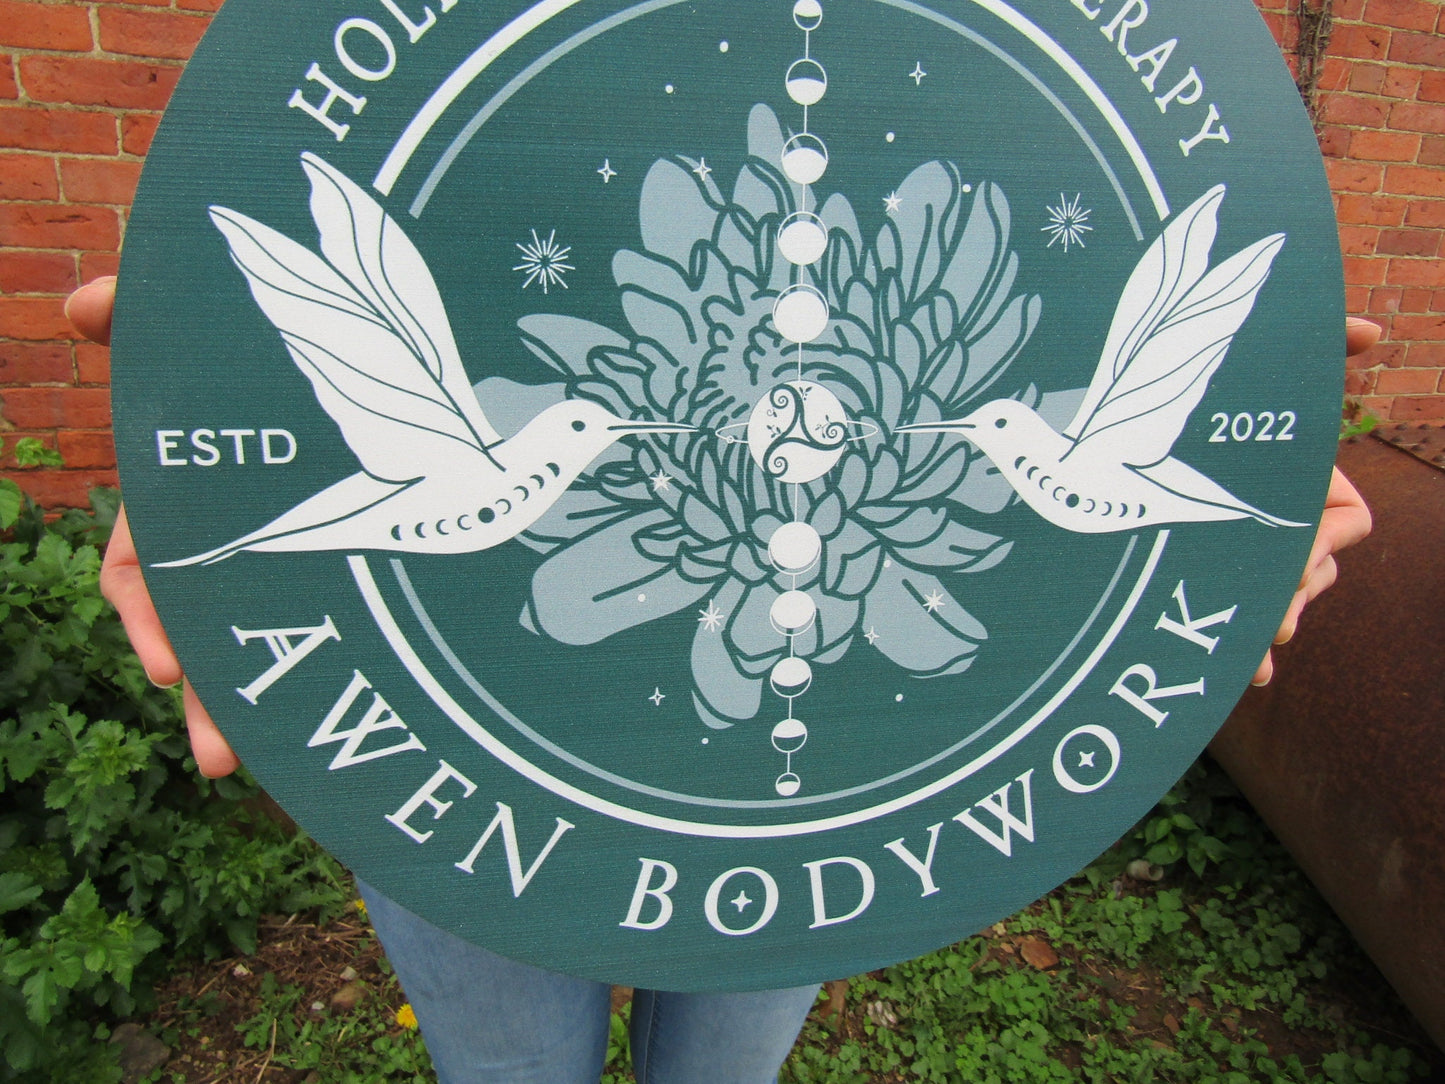 Massage Therapy Sign Bodywork Art Lotus Birds Your Logo Business Sign Commerical signage Printed On Wood Lightweight Hanging Office Sign